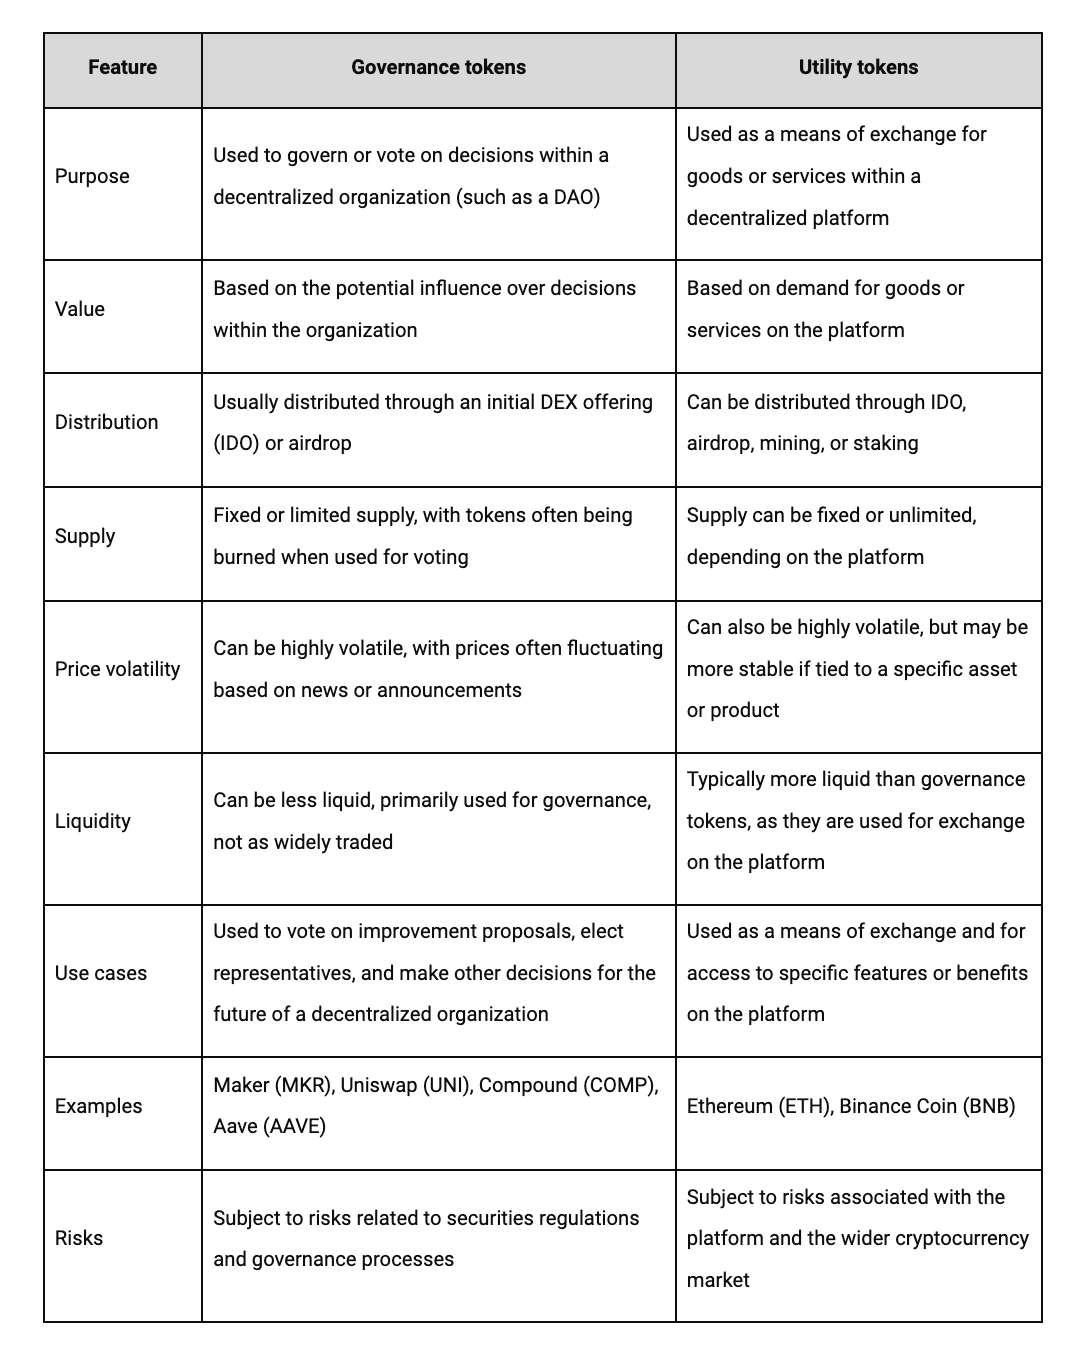 A table showing the differences between governance tokens and utility tokens